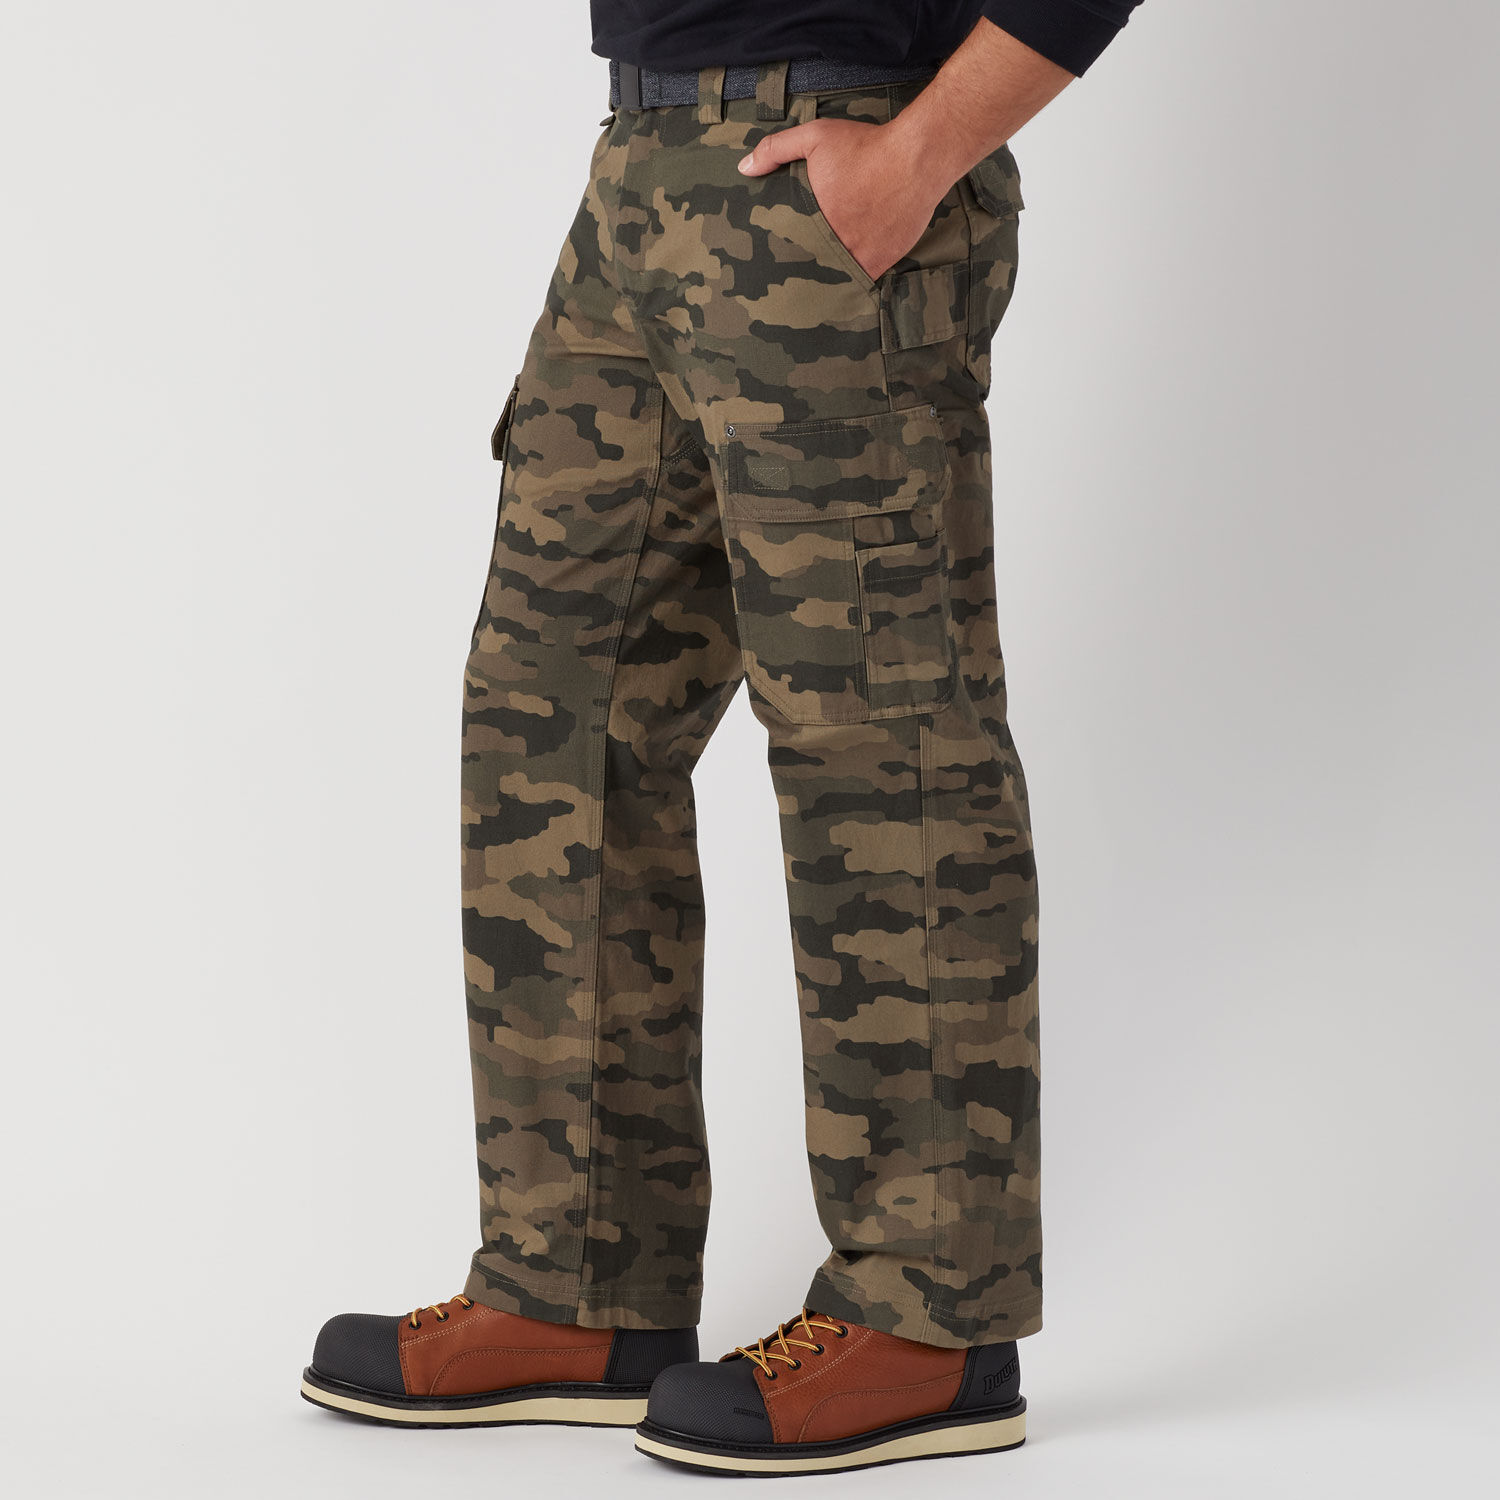 Camouflage Cargo Trousers For Men, Loose Fit